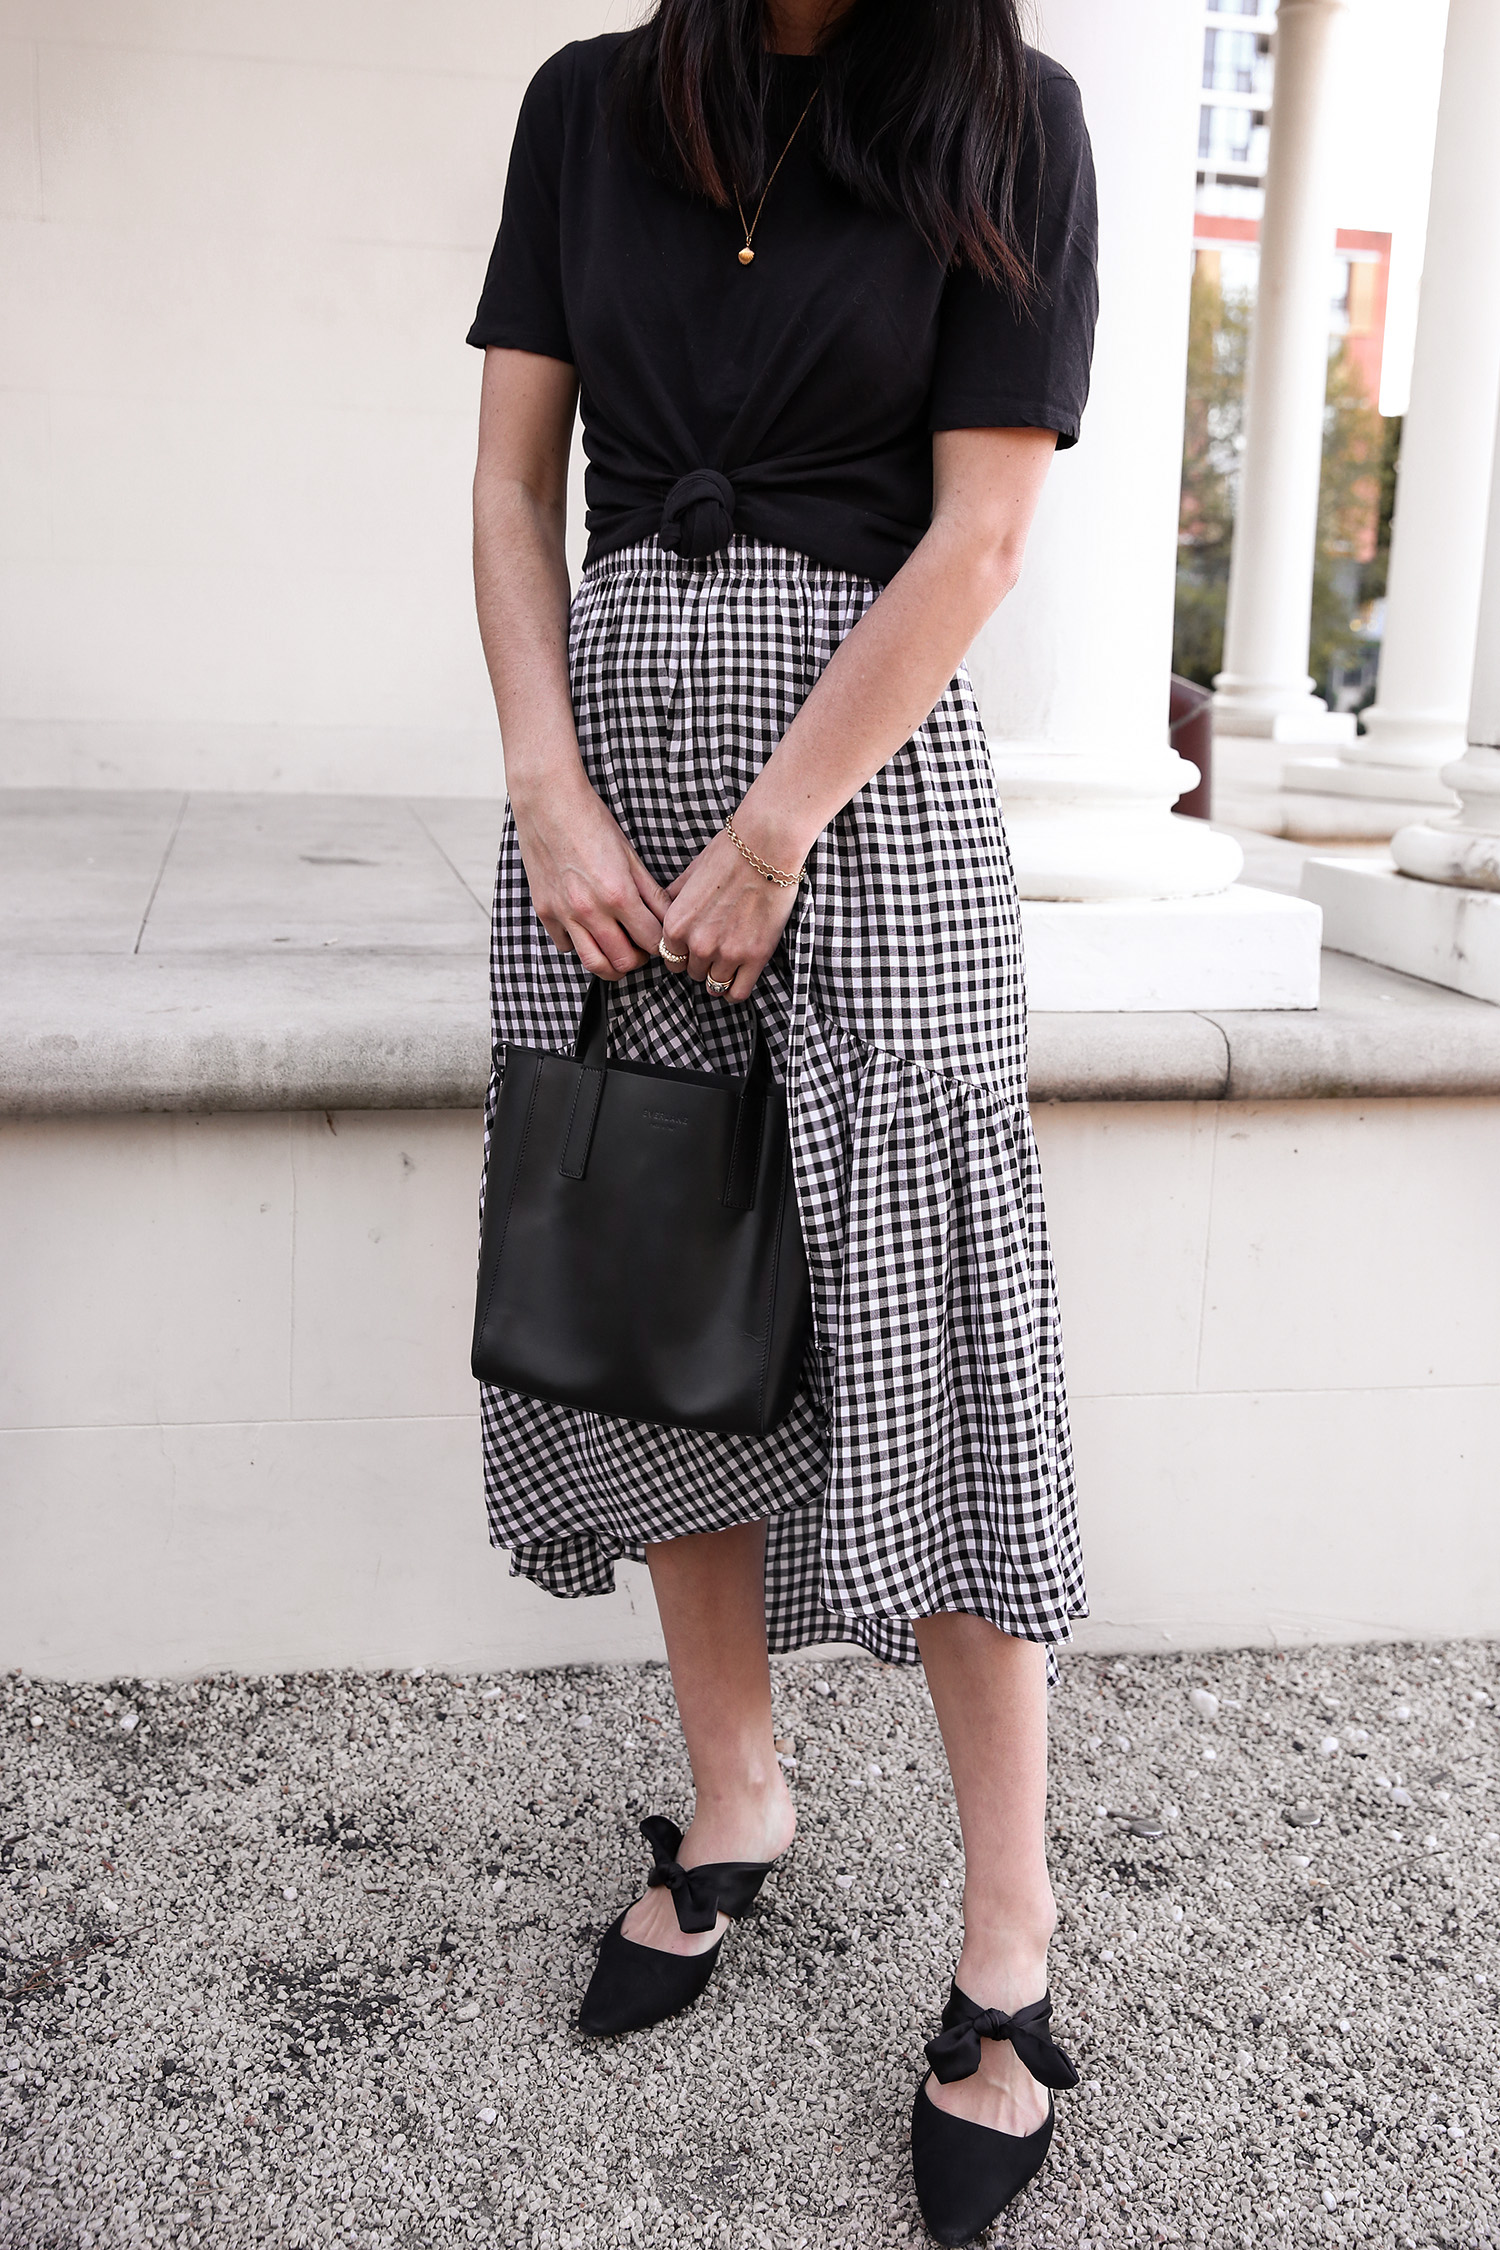 Jamie Lee of Mademoiselle wearing a knotted tee and gingham skirt minimal style